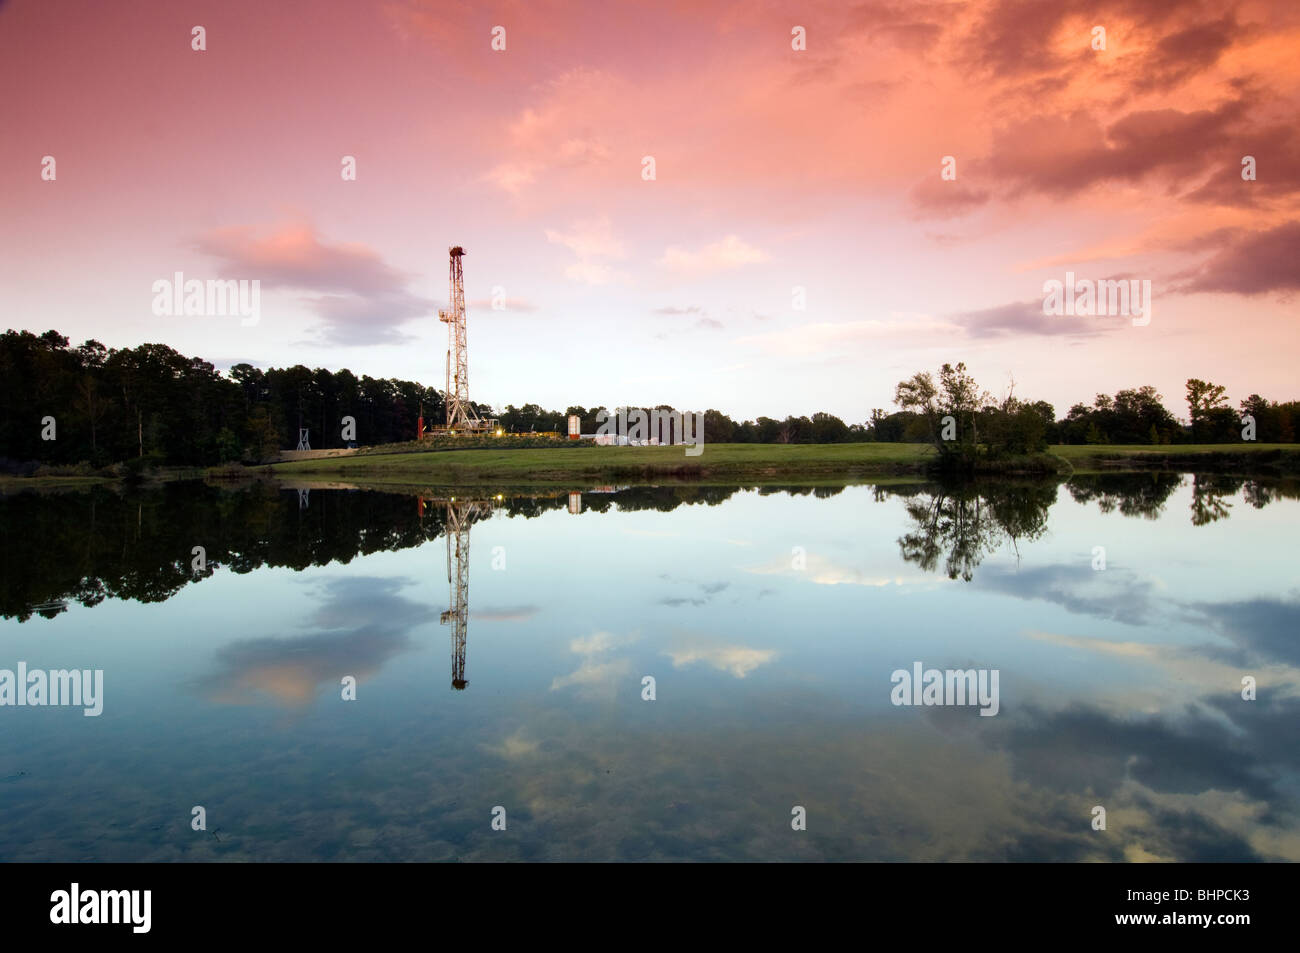 Oil drilling rig with water feflection Stock Photo